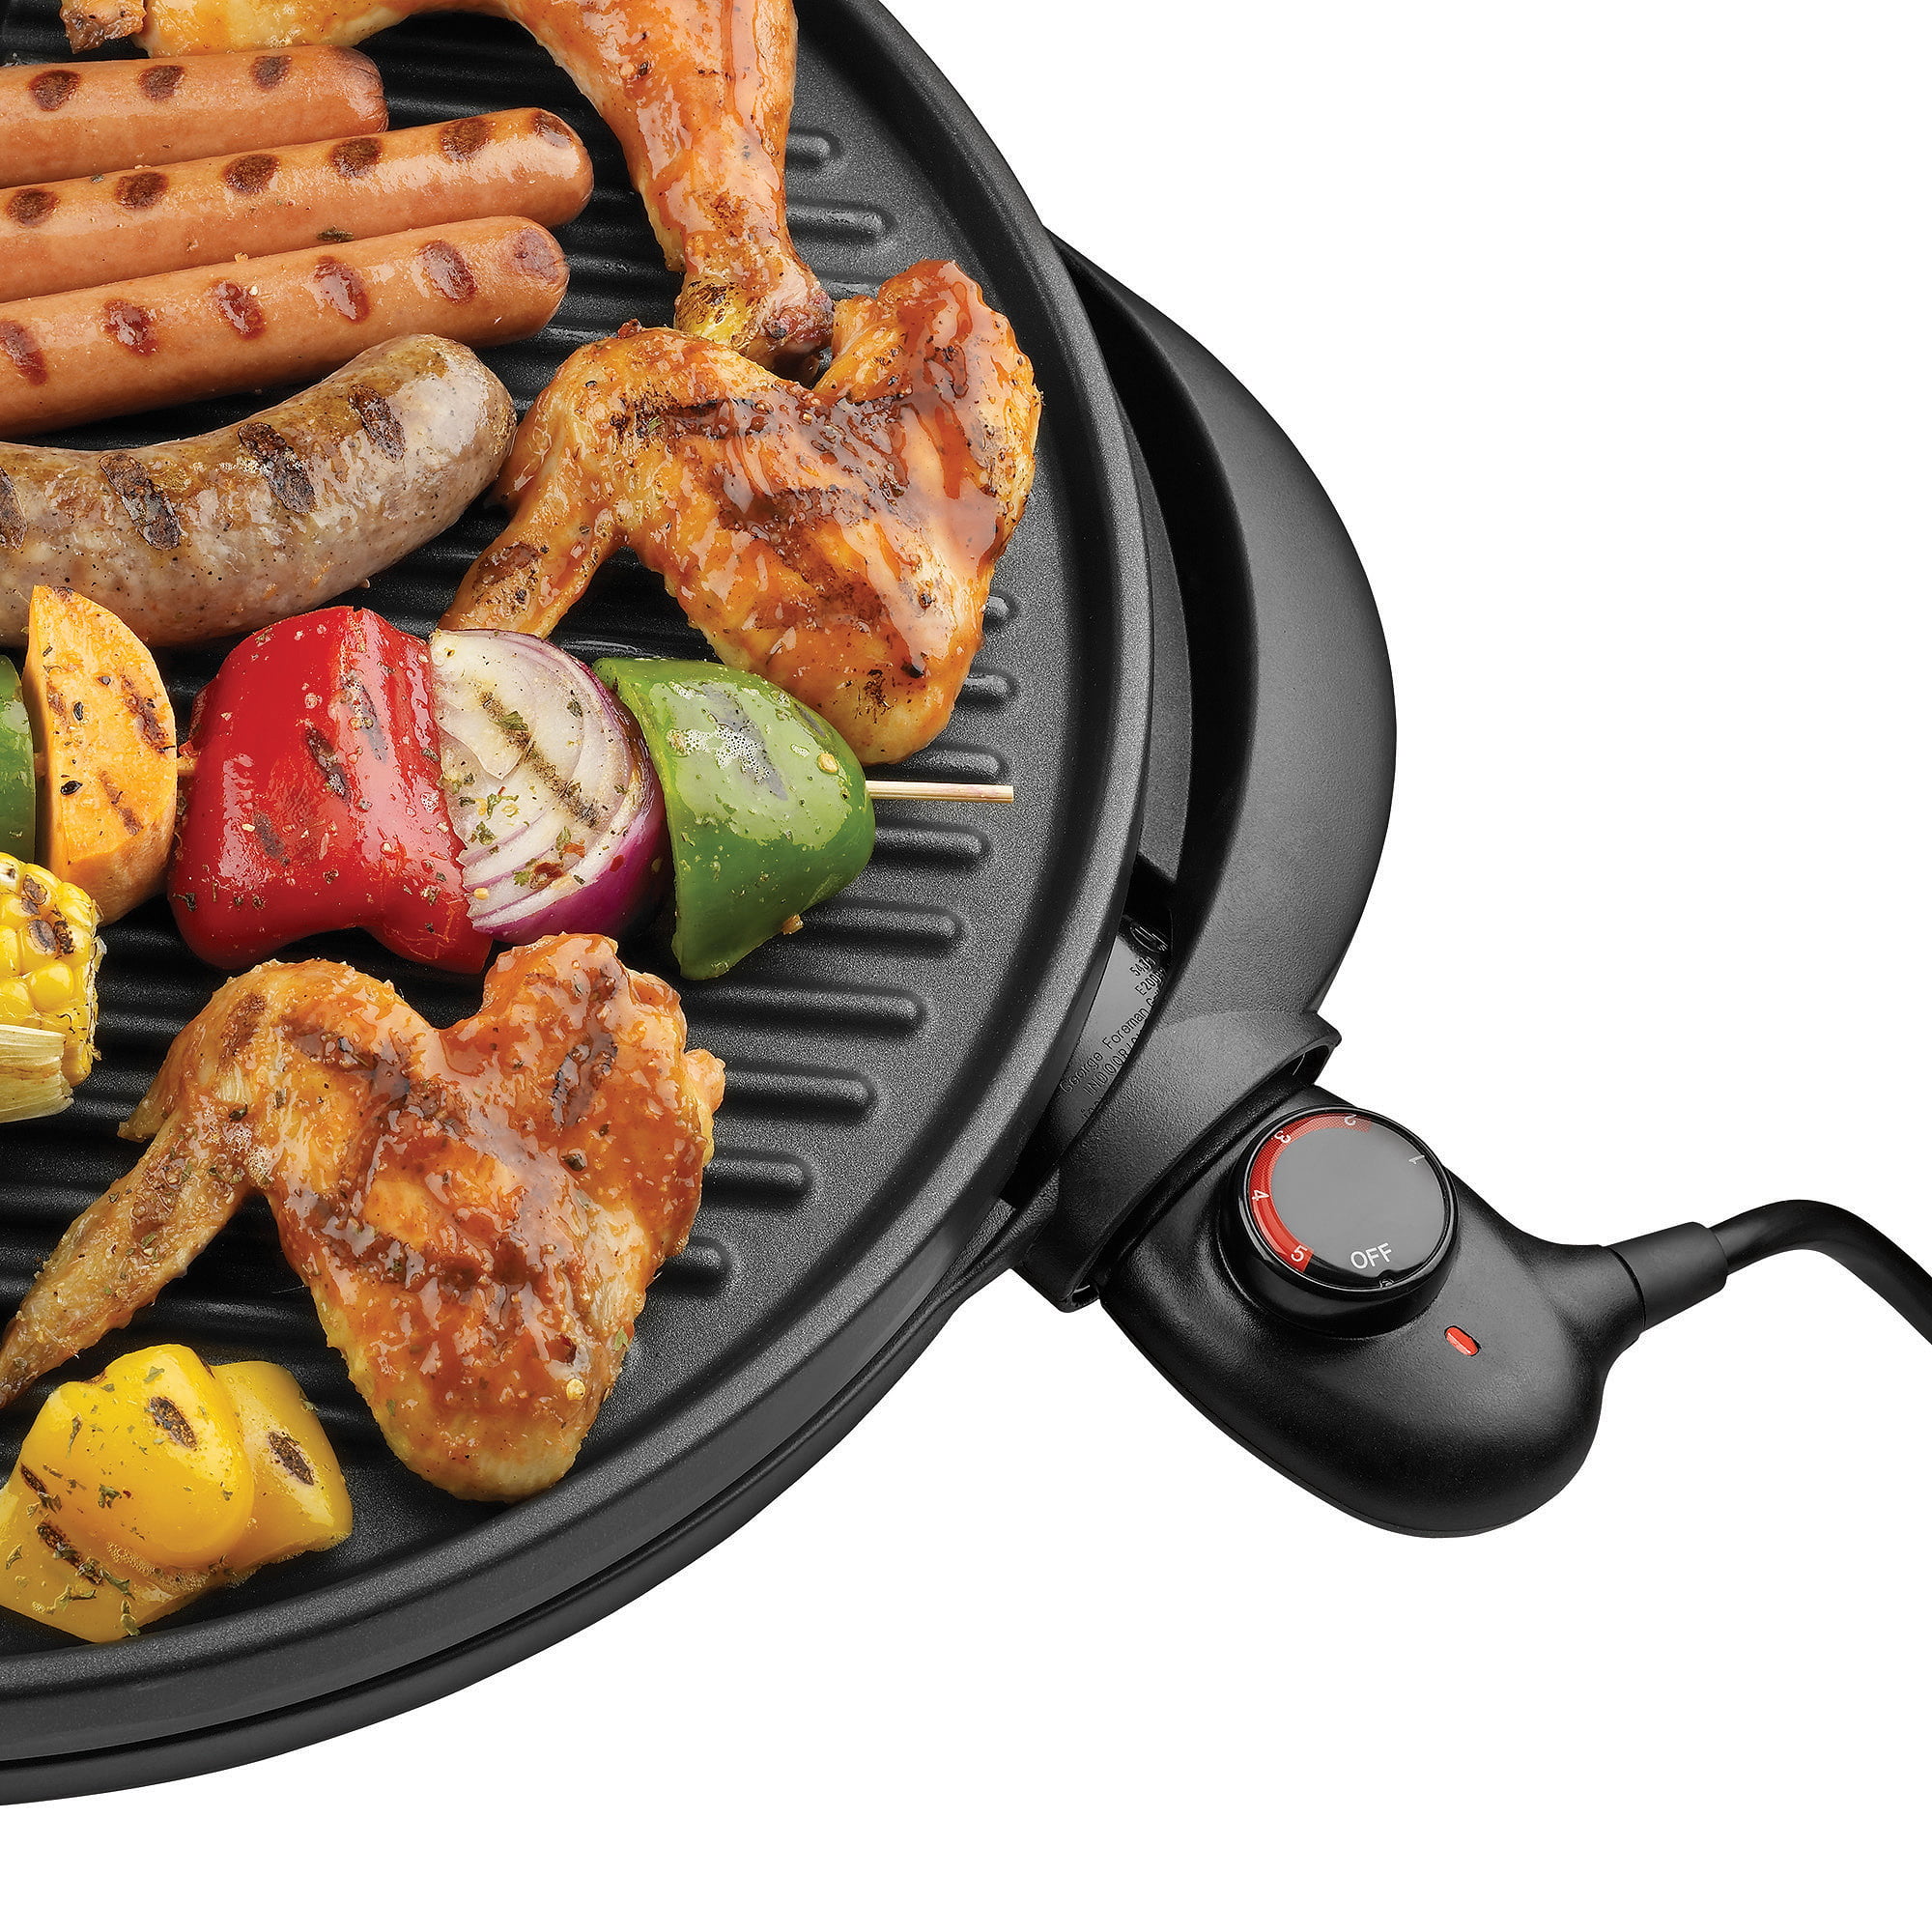 George Foreman 240 Sq. In. Indoor/Outdoor Electric Grill GFO240S, 1 - Food  4 Less